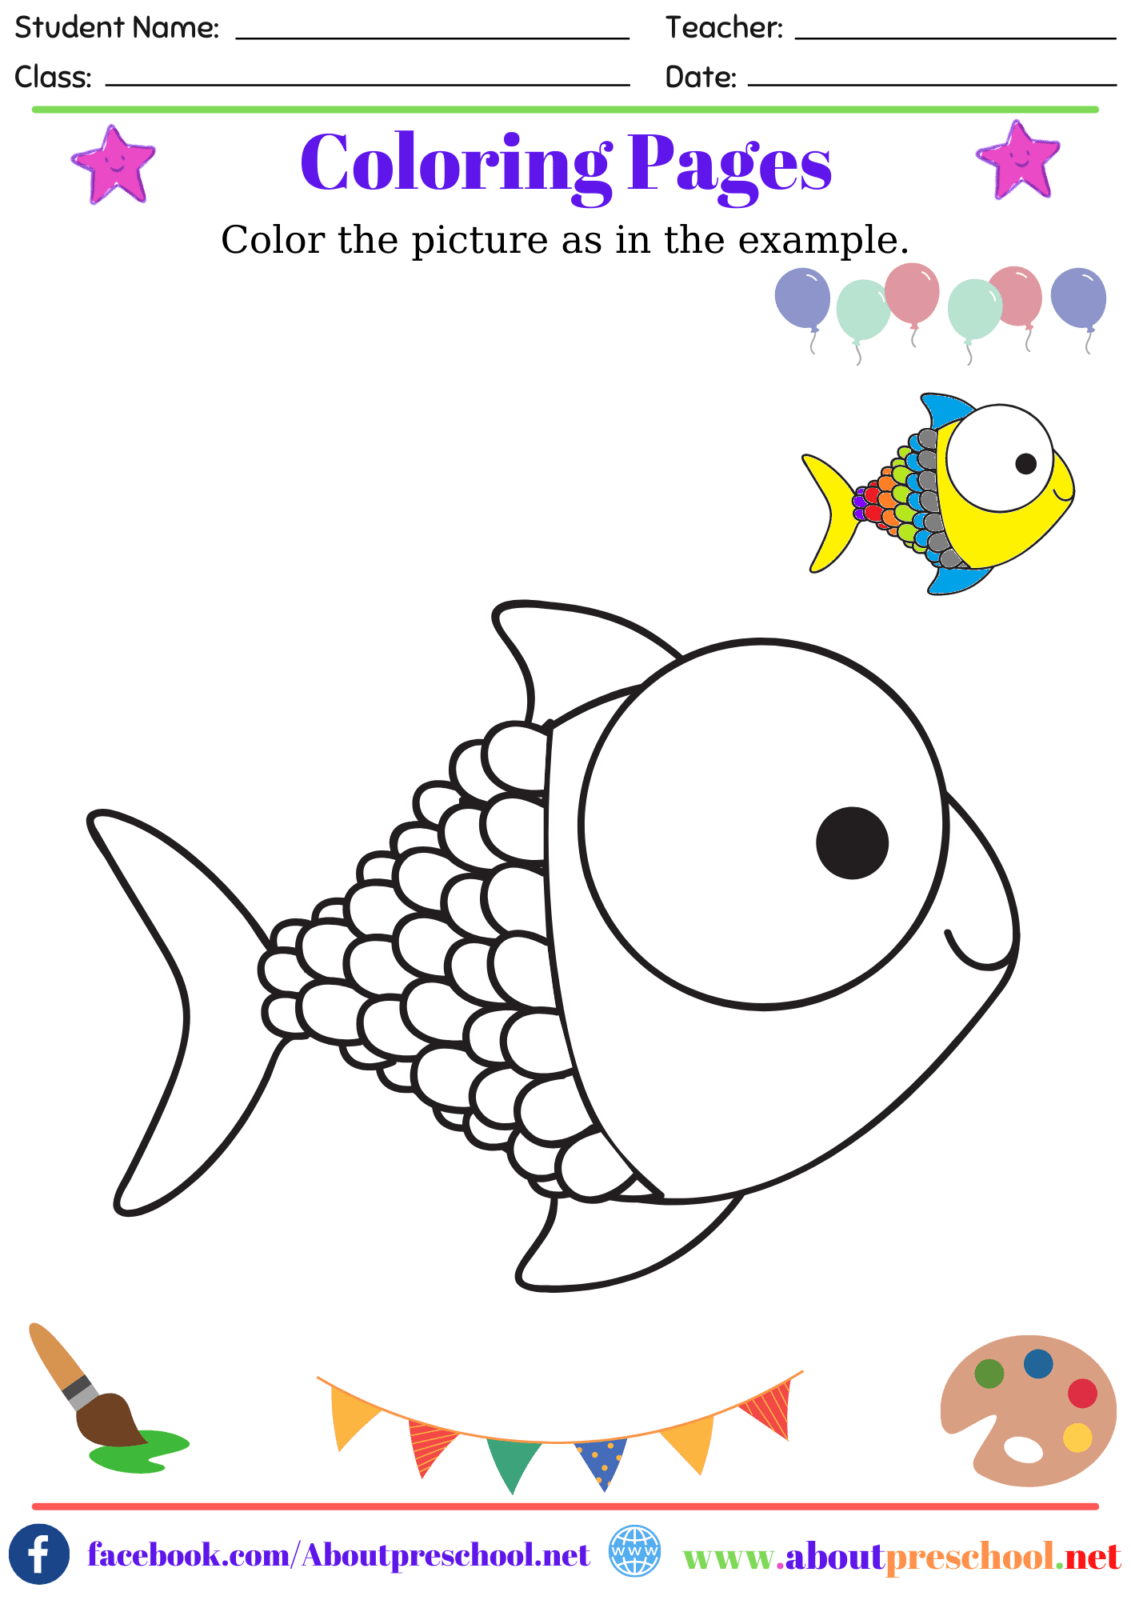 Coloring Pages 16